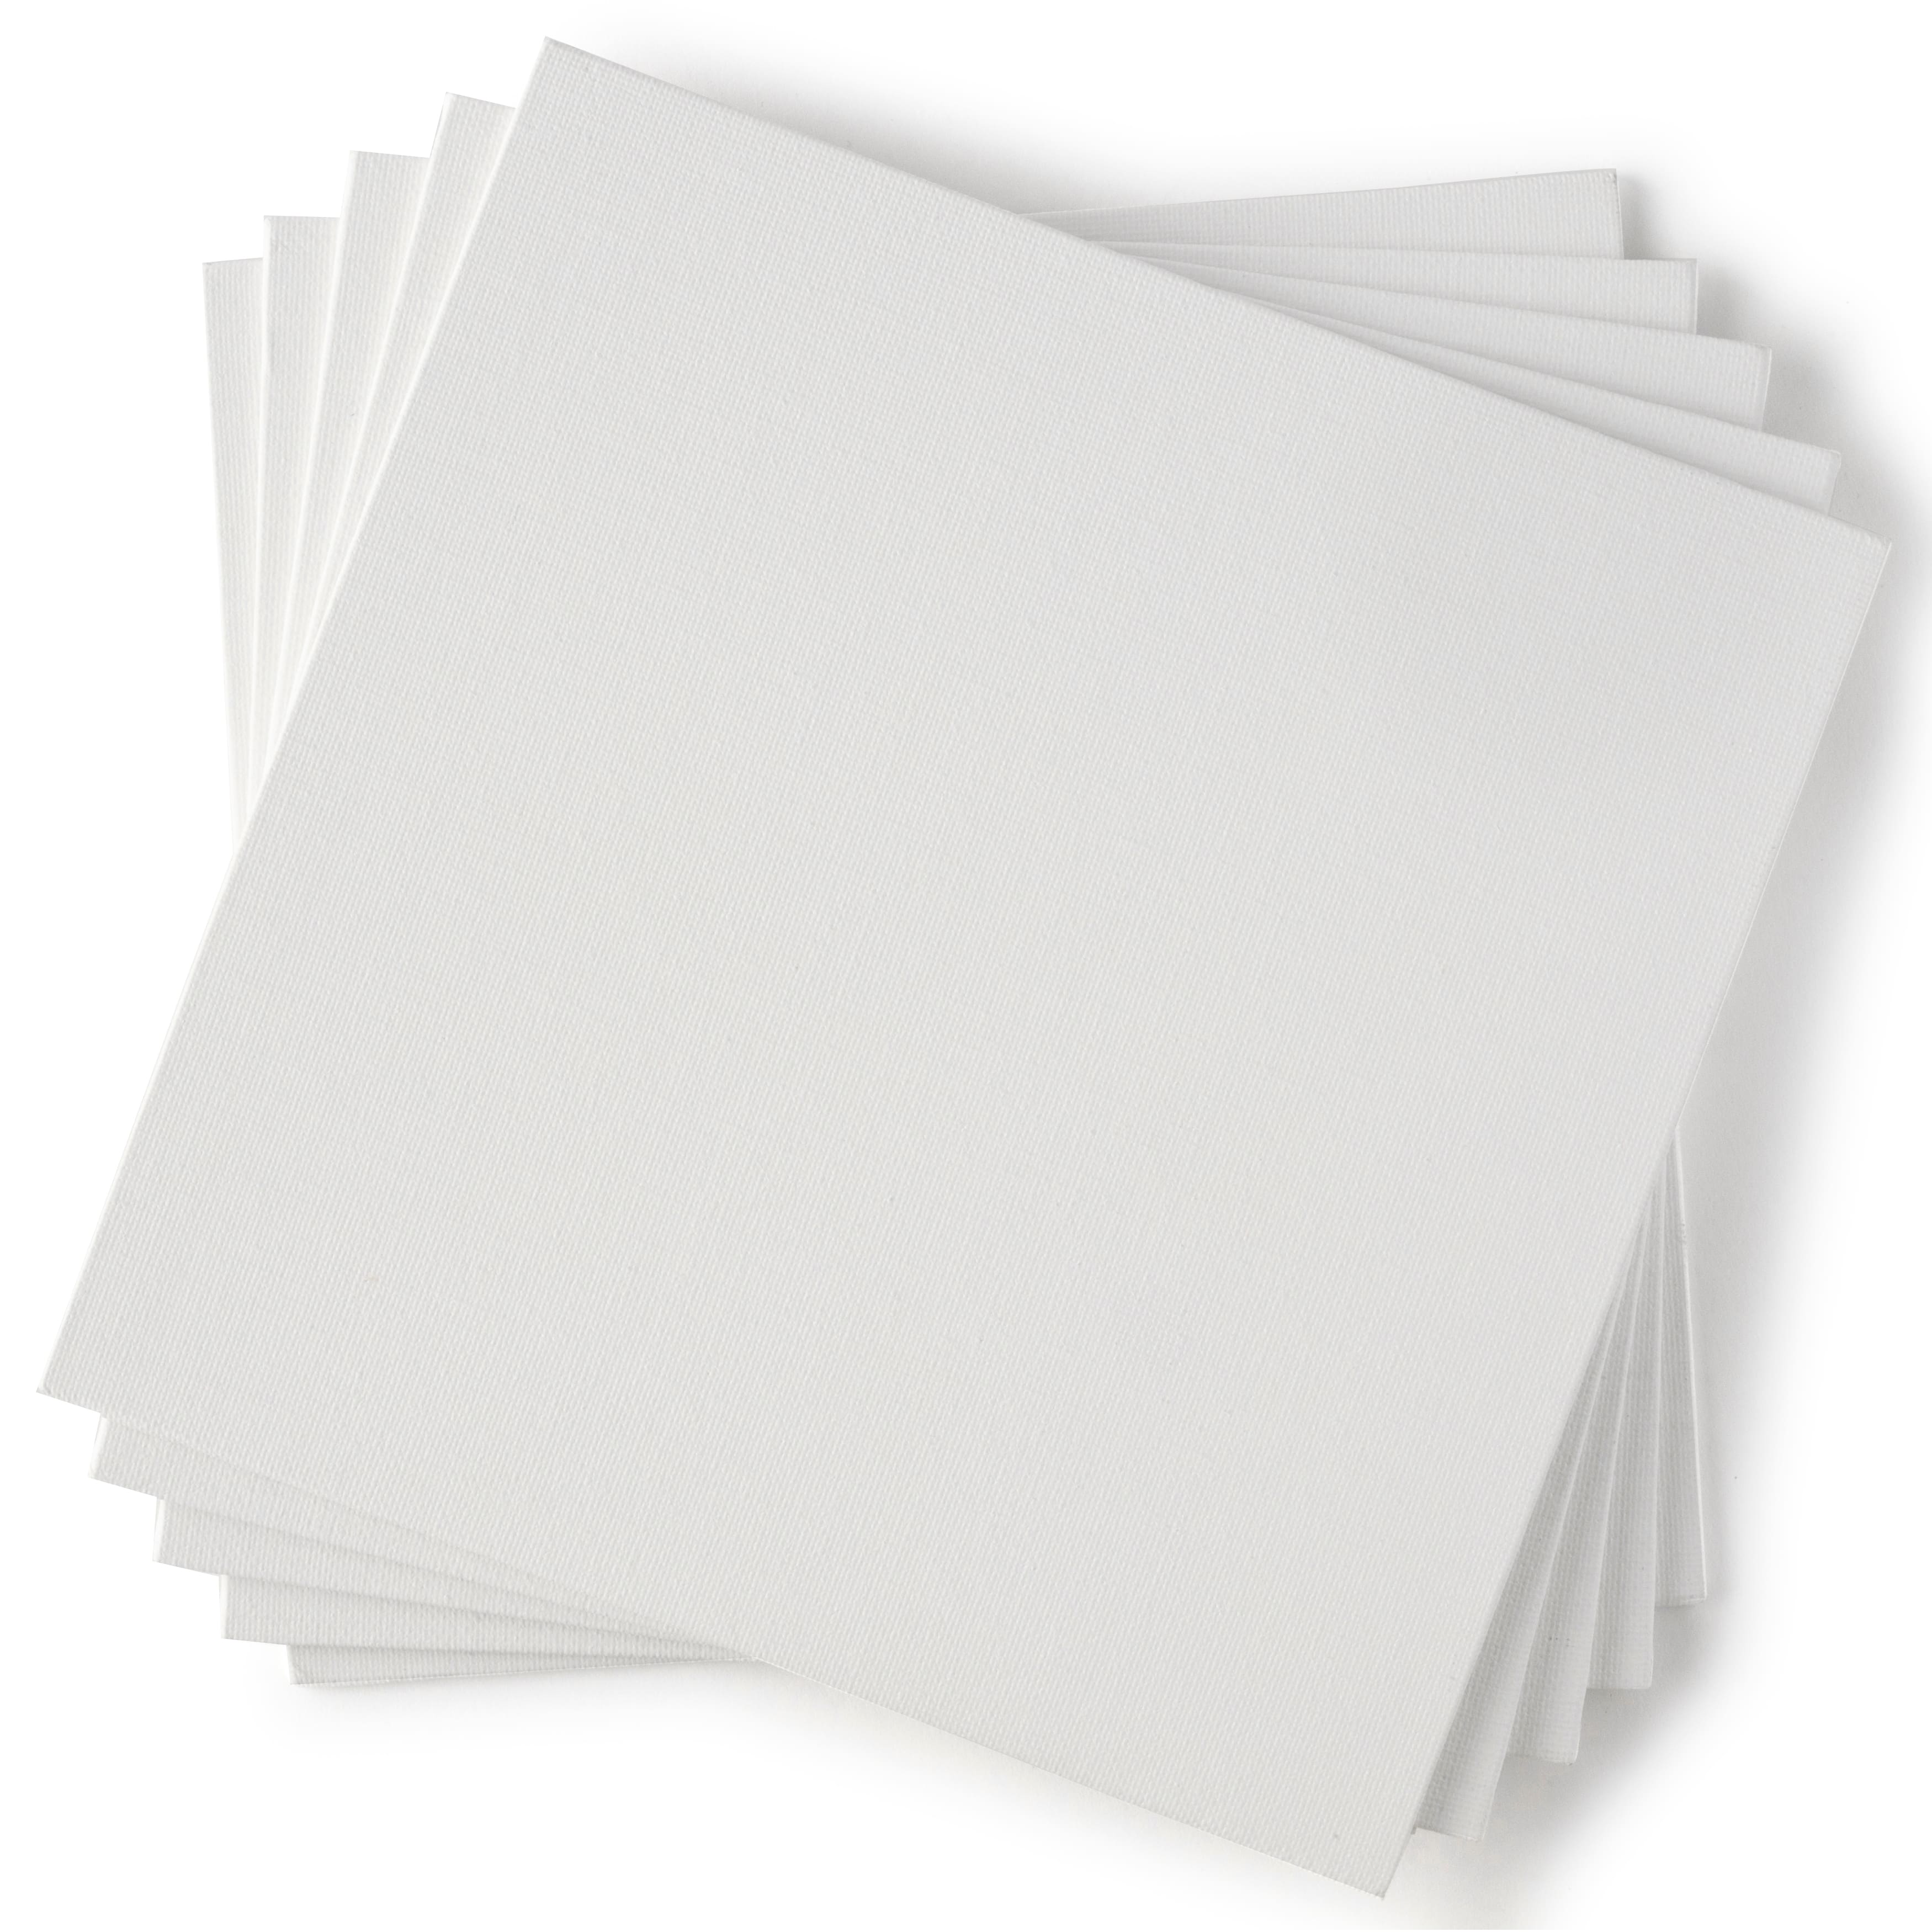 8 1/2 x 11 Paper - White Canvas - Pack of 50 